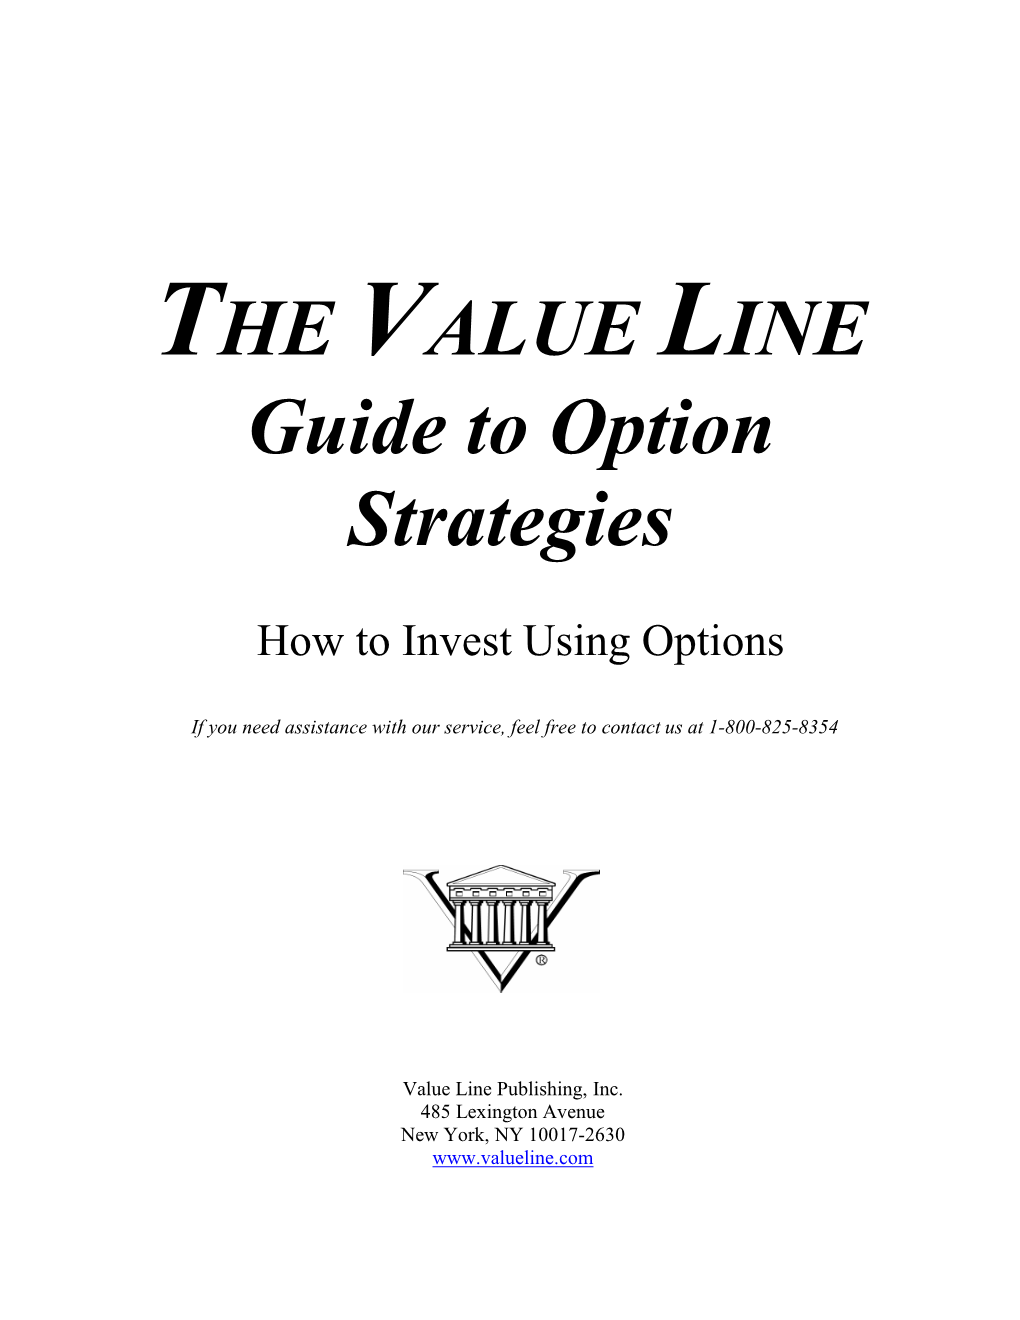 THE VALUE LINE Guide to Option Strategies